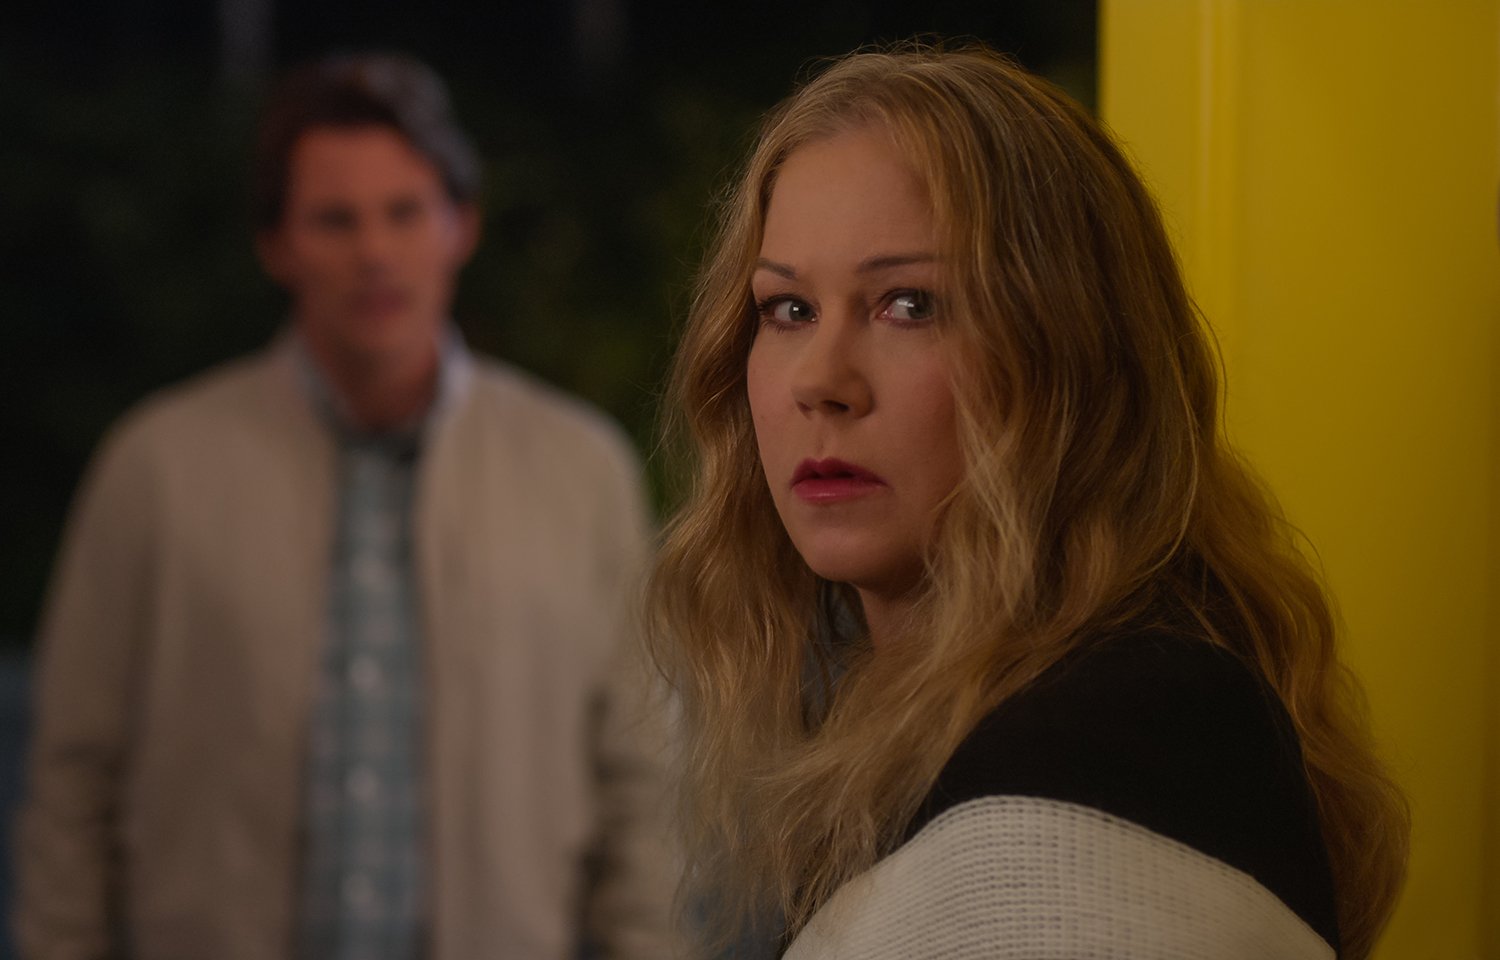 Dead to Me Season 3: James Marsden's Ben Wood stands in the background wearing a plaid shirt and tan jacket as Christina Applegate's Jen Harding looks over her shoulder wearing black